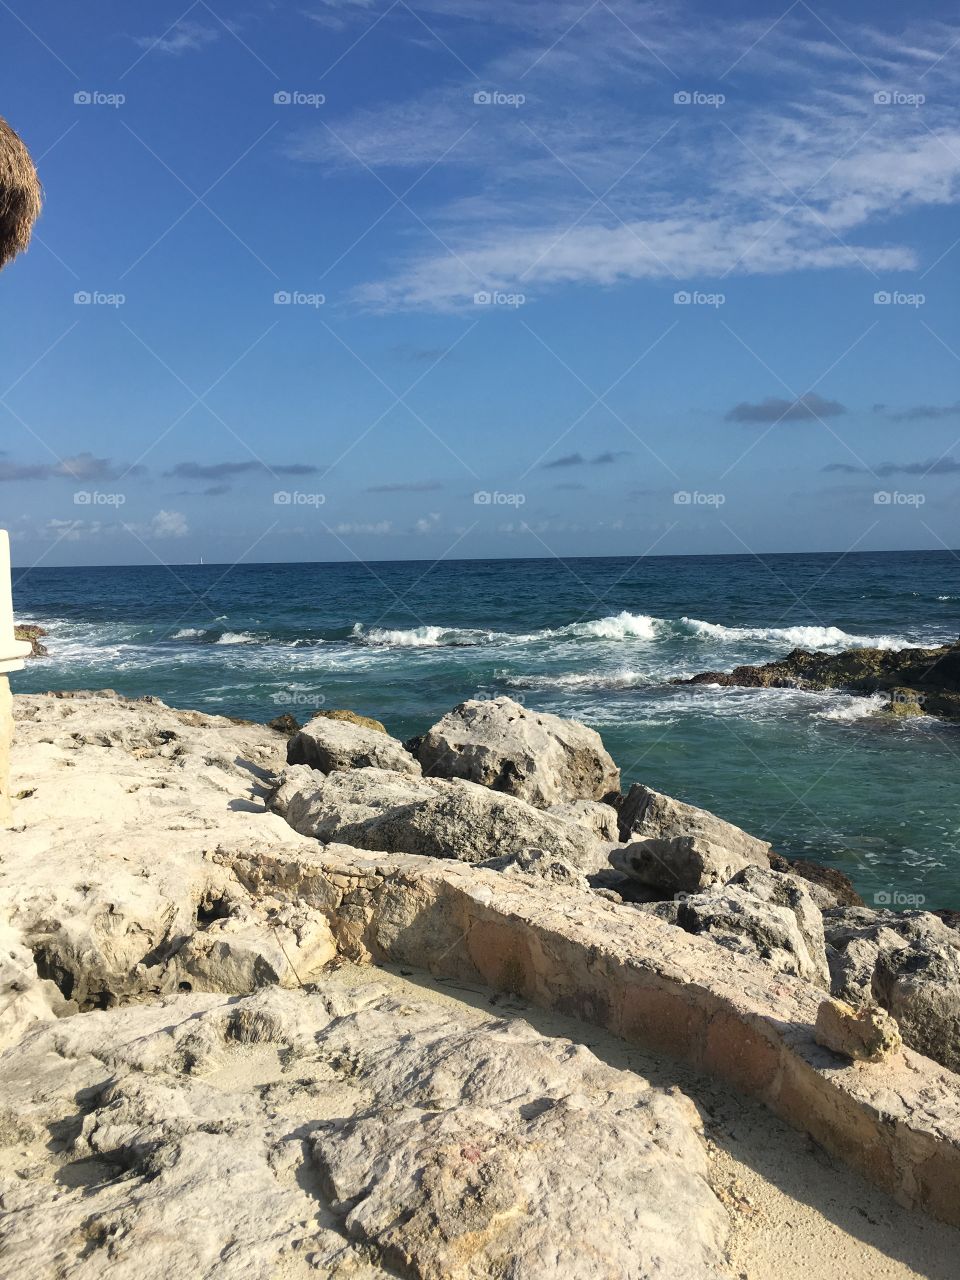 Cancun, Mexico. January 2016